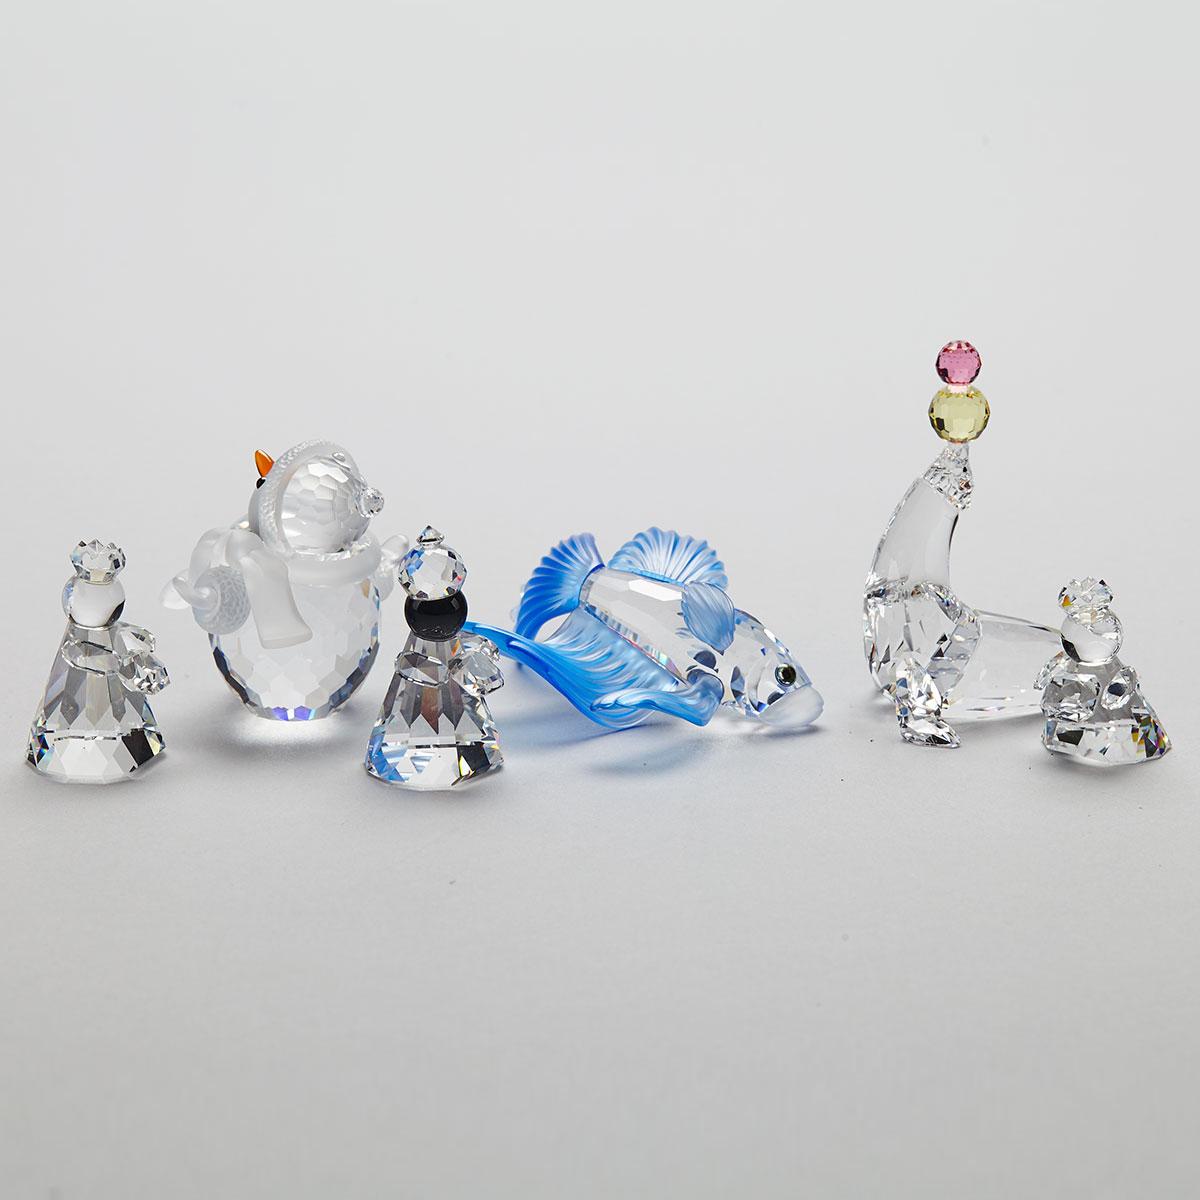 Four Swarovski Crystal Figurines, late 20th/early 21st century